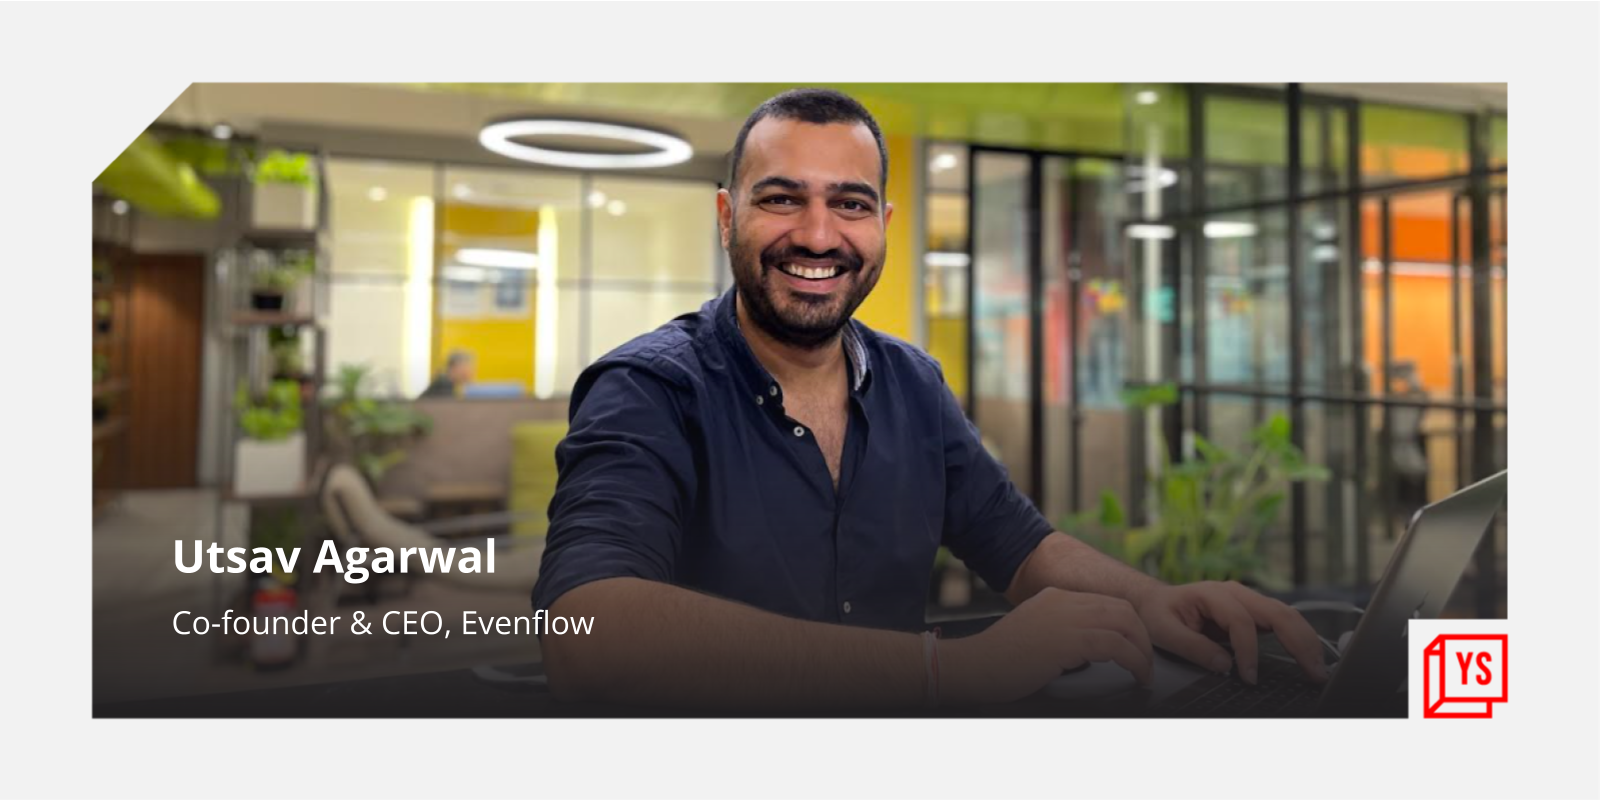 [Funding alert] Ecommerce rollup platform Evenflow raises $5M in Pre-Series A from Village Global, 9Unicorns, Shiprocket, others